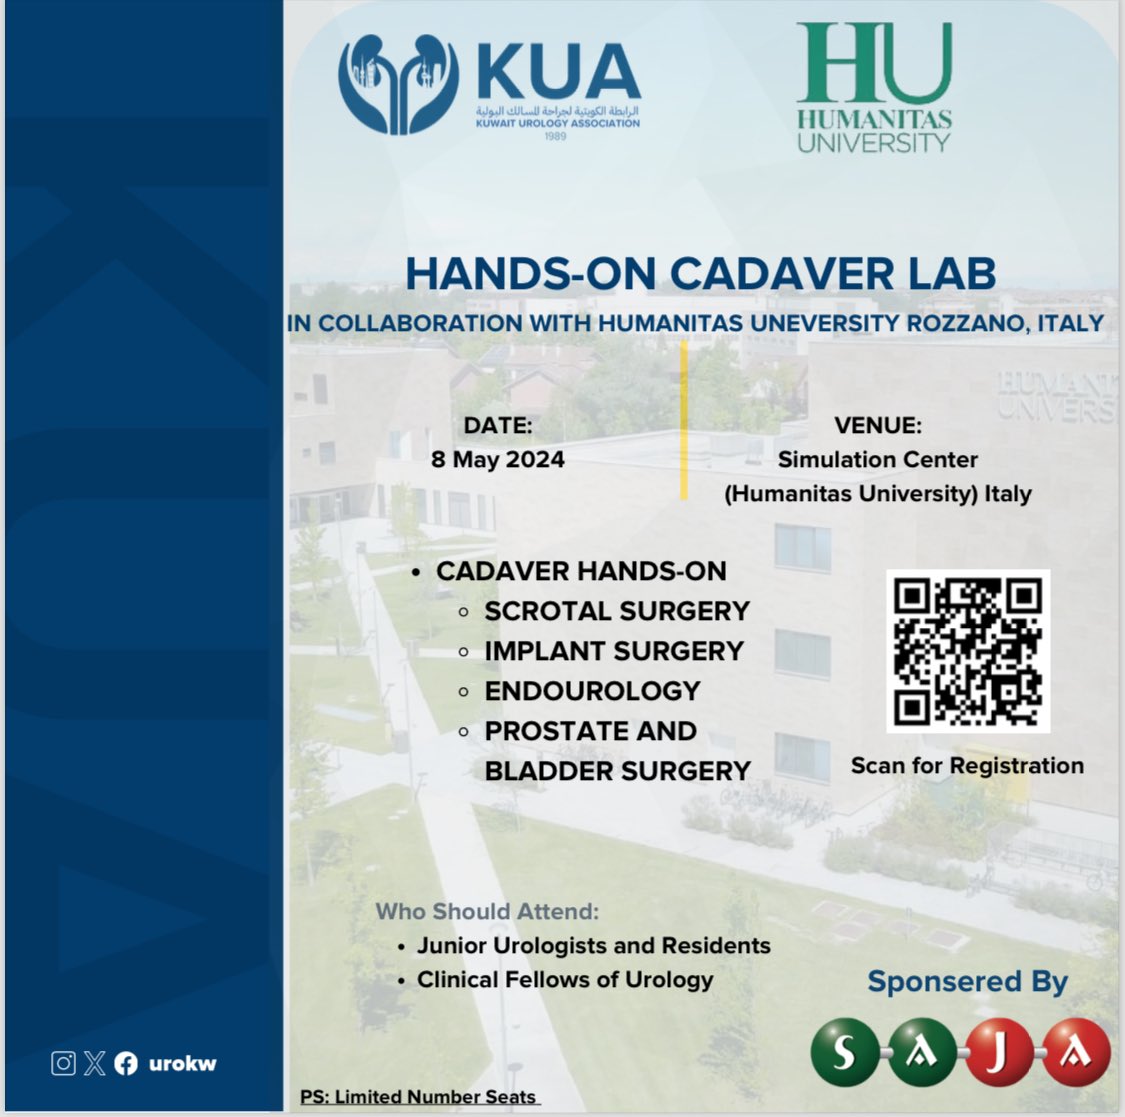 An exciting opportunity for junior urologists and fellows ! KUA in collaboration with Gradenigo Hospital and Humanitus Hospital in Italy are arranging a cadaver lab workshop. Special thanks to SAJA pharmaceuticals for their invaluable support Book your seat